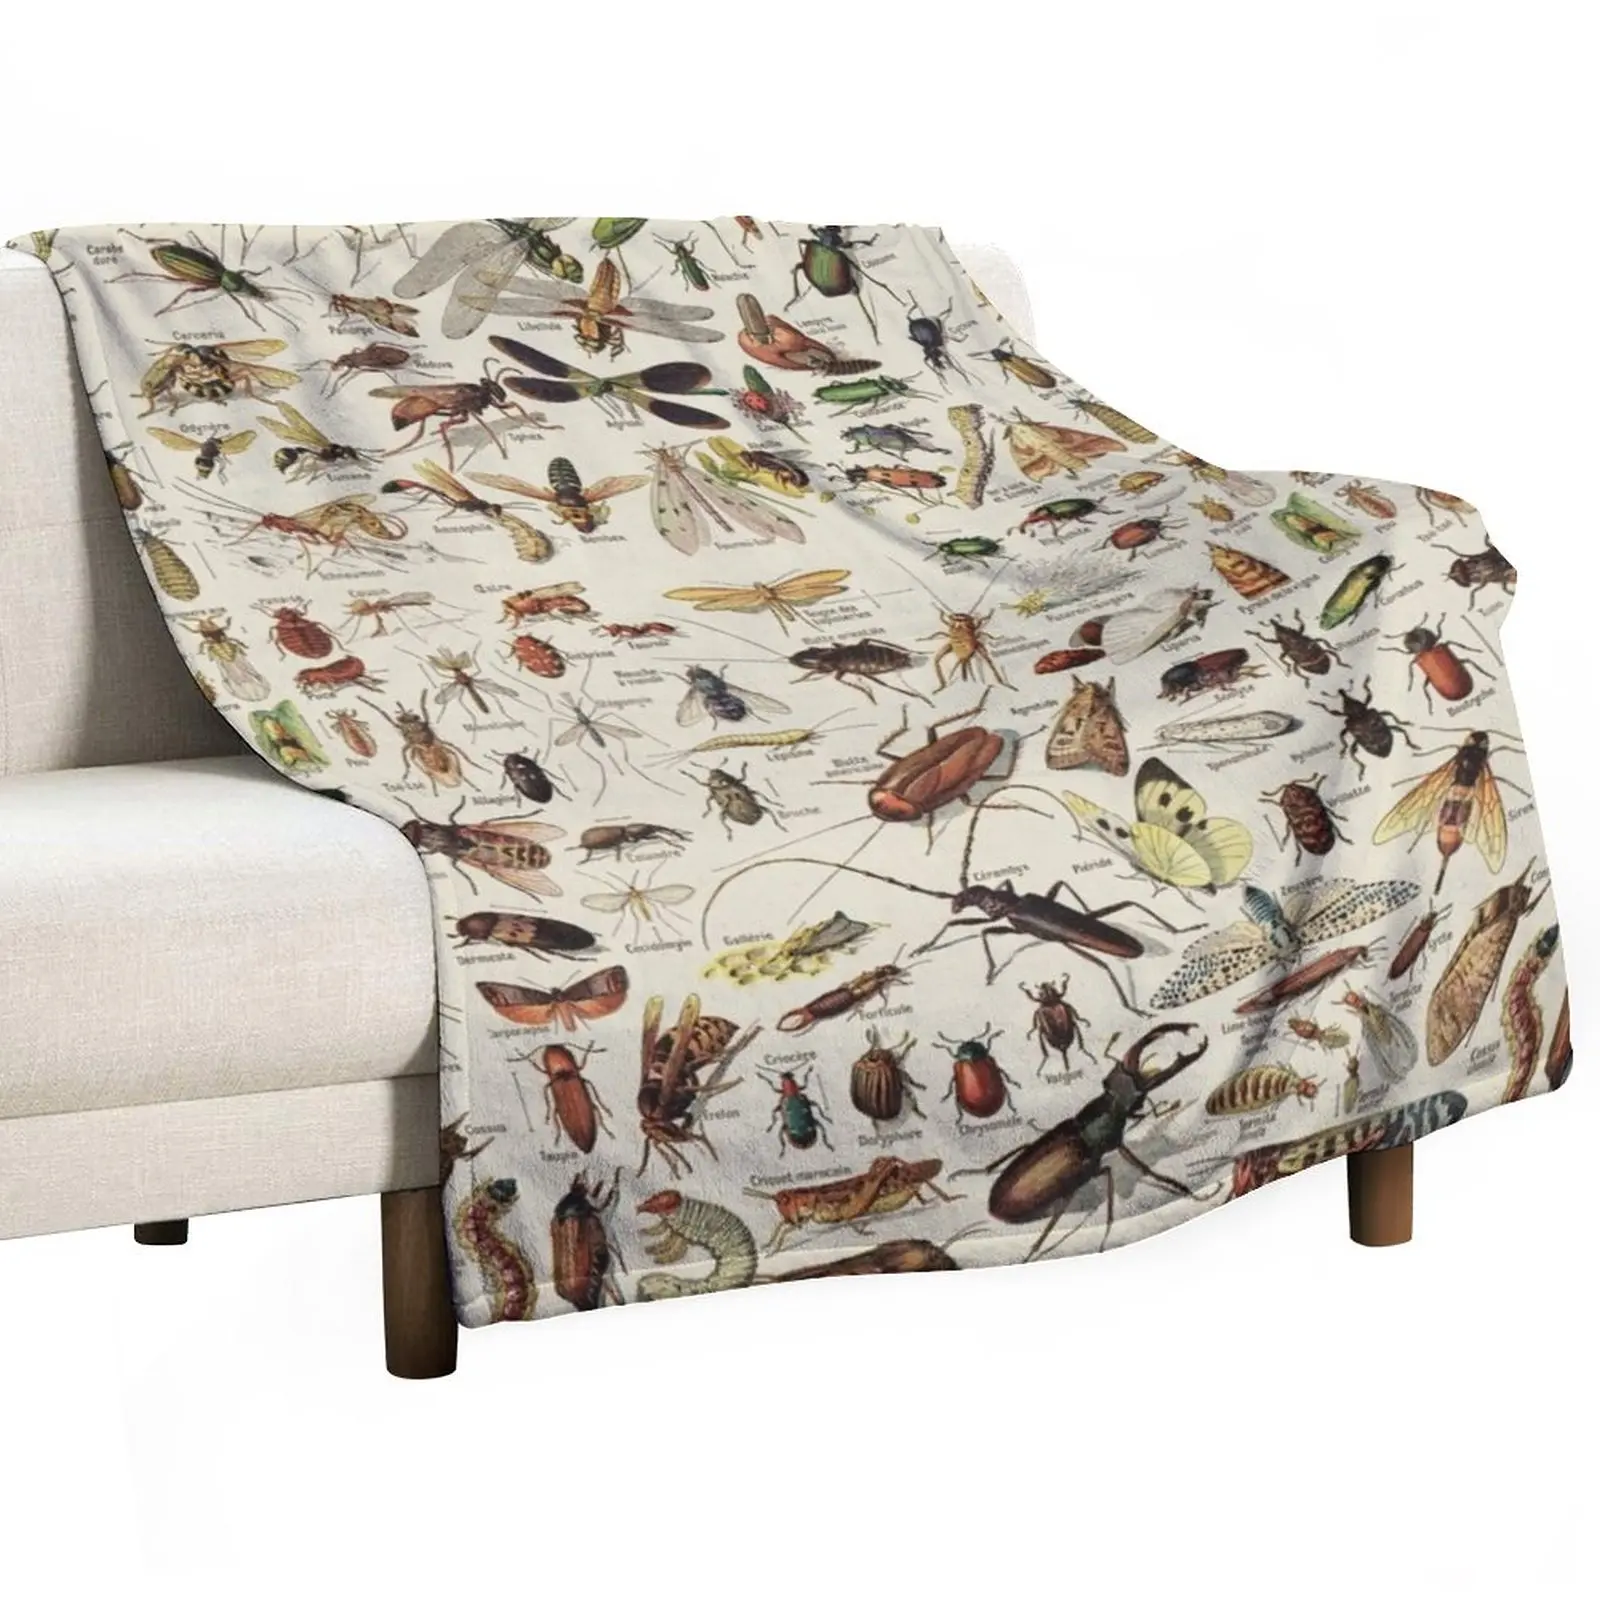 

Insects Chart. Scientific Illustration, text in french Throw Blanket anime halloween For Decorative Sofa Summer Blankets